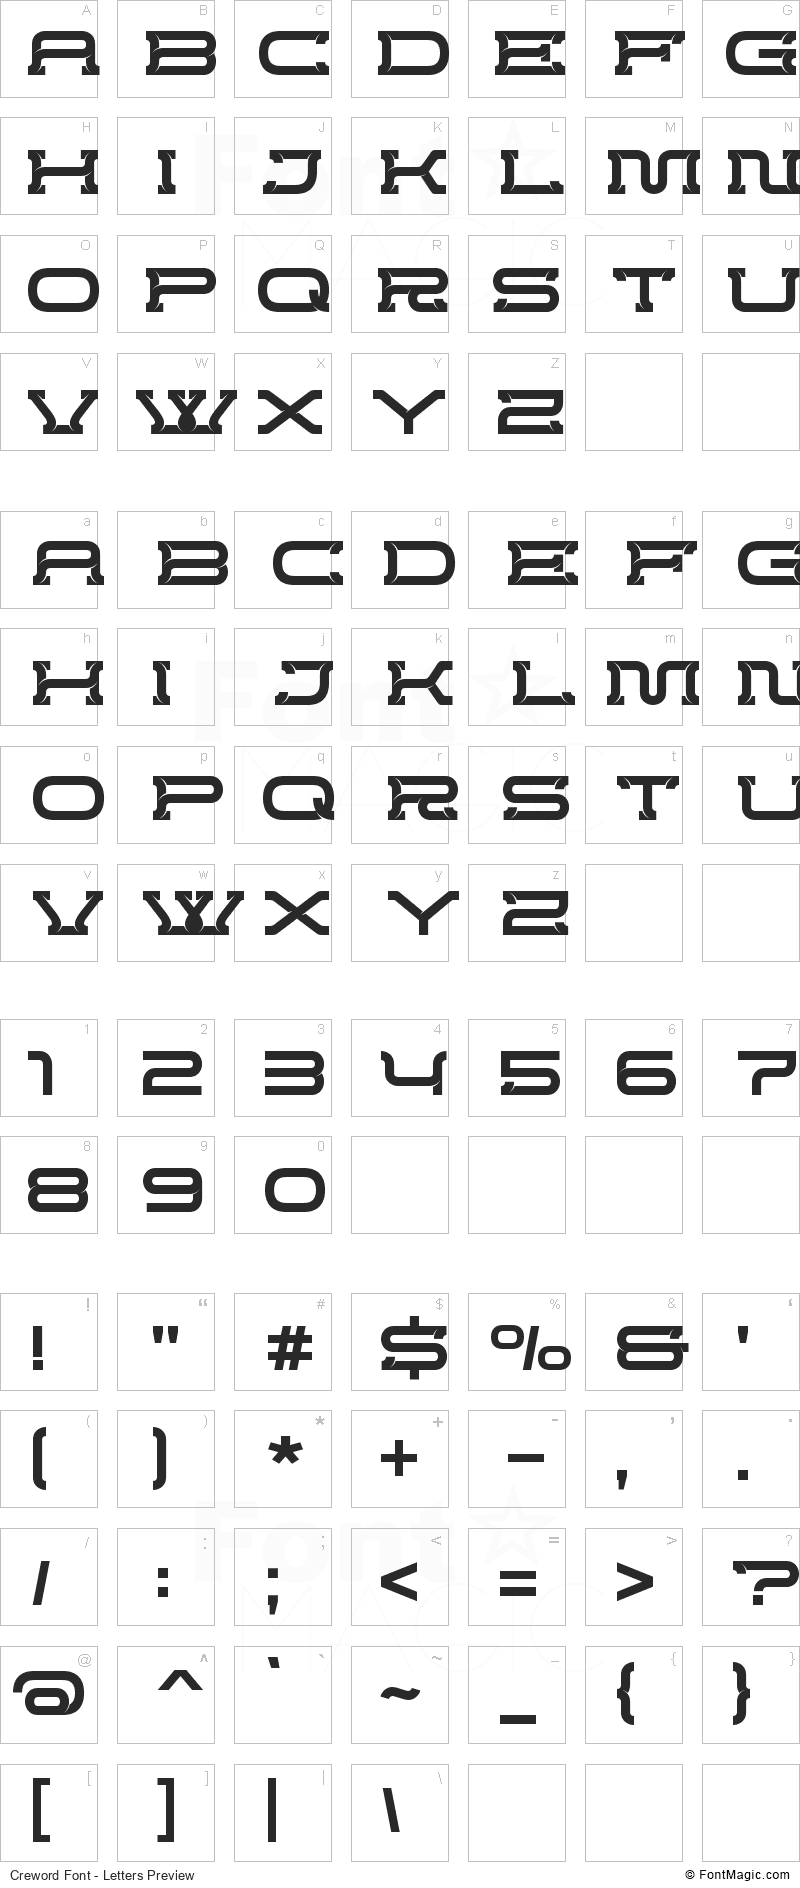 Creword Font - All Latters Preview Chart